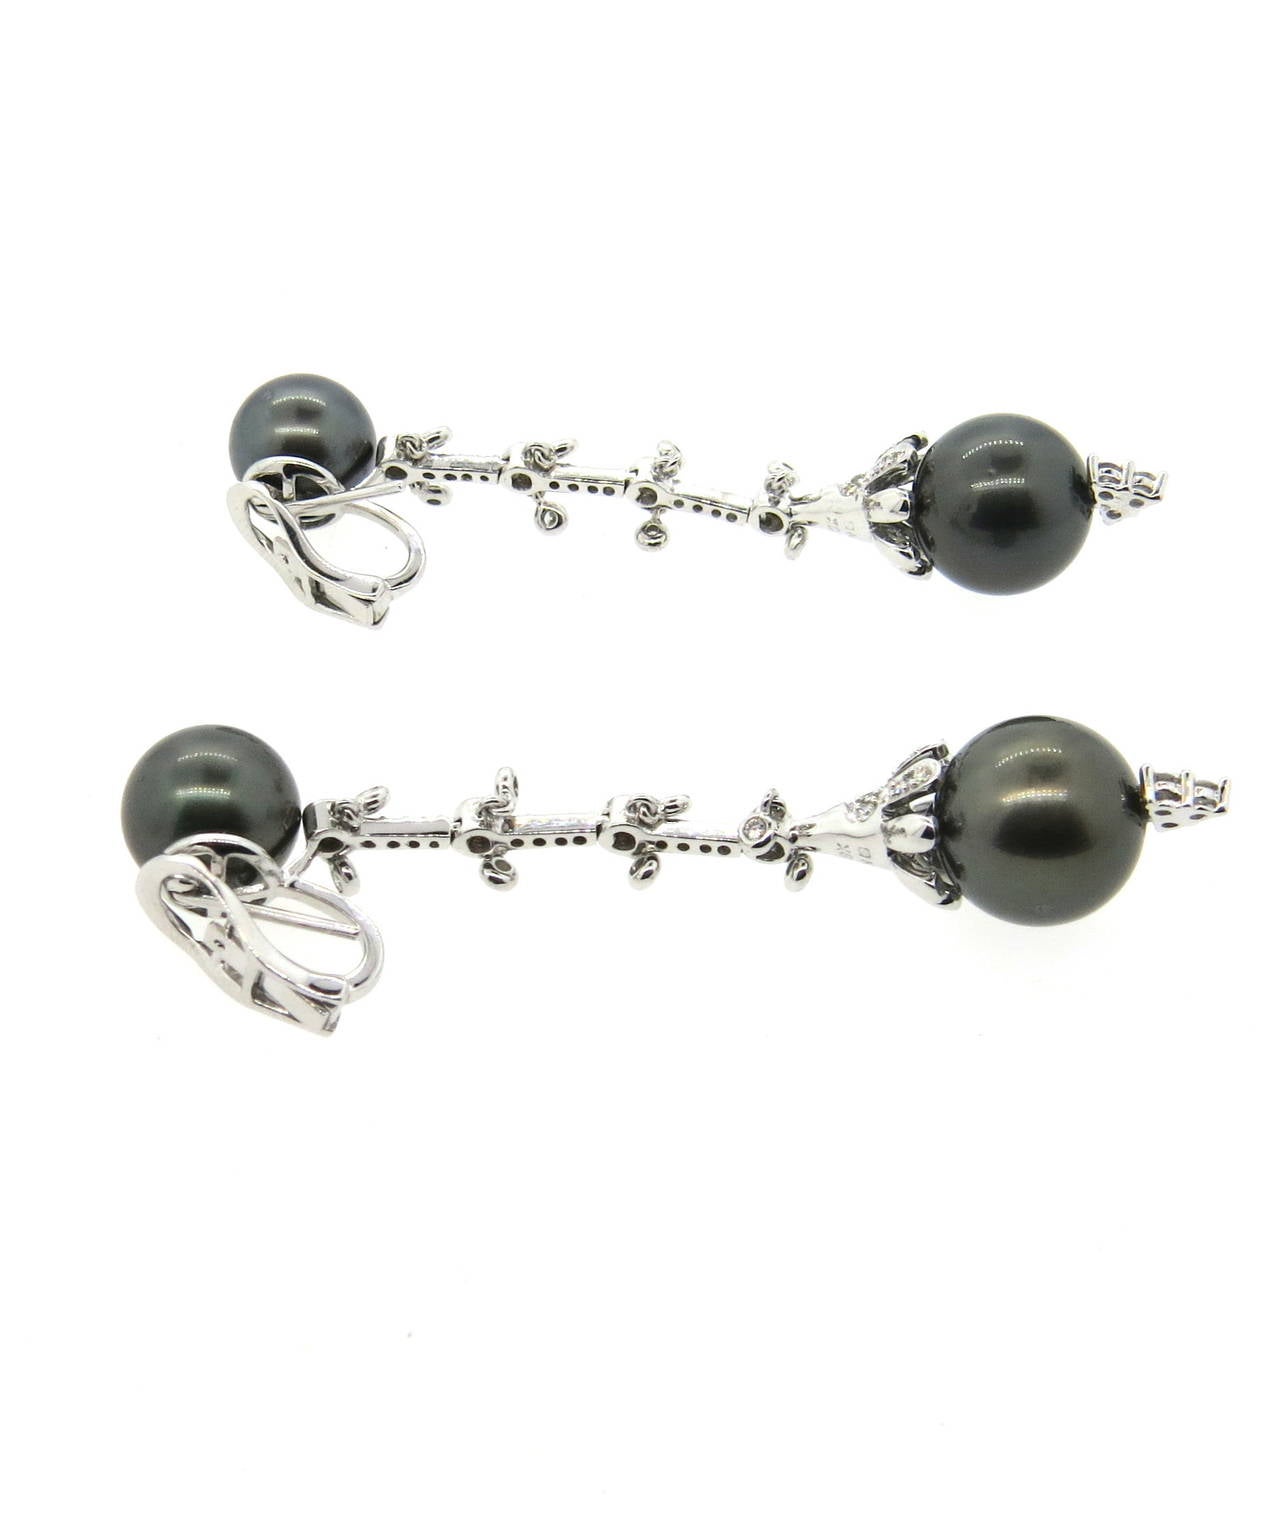 Beautiful 18K white gold long drop earrings featuring Tahitian pearls and decorated in approximately 0.80-0.90ctw of diamonds. Pearls measure 10.9mm and 12.8mm in diameter. Earrings measure 68mm long. Weigh 20.5 grams.